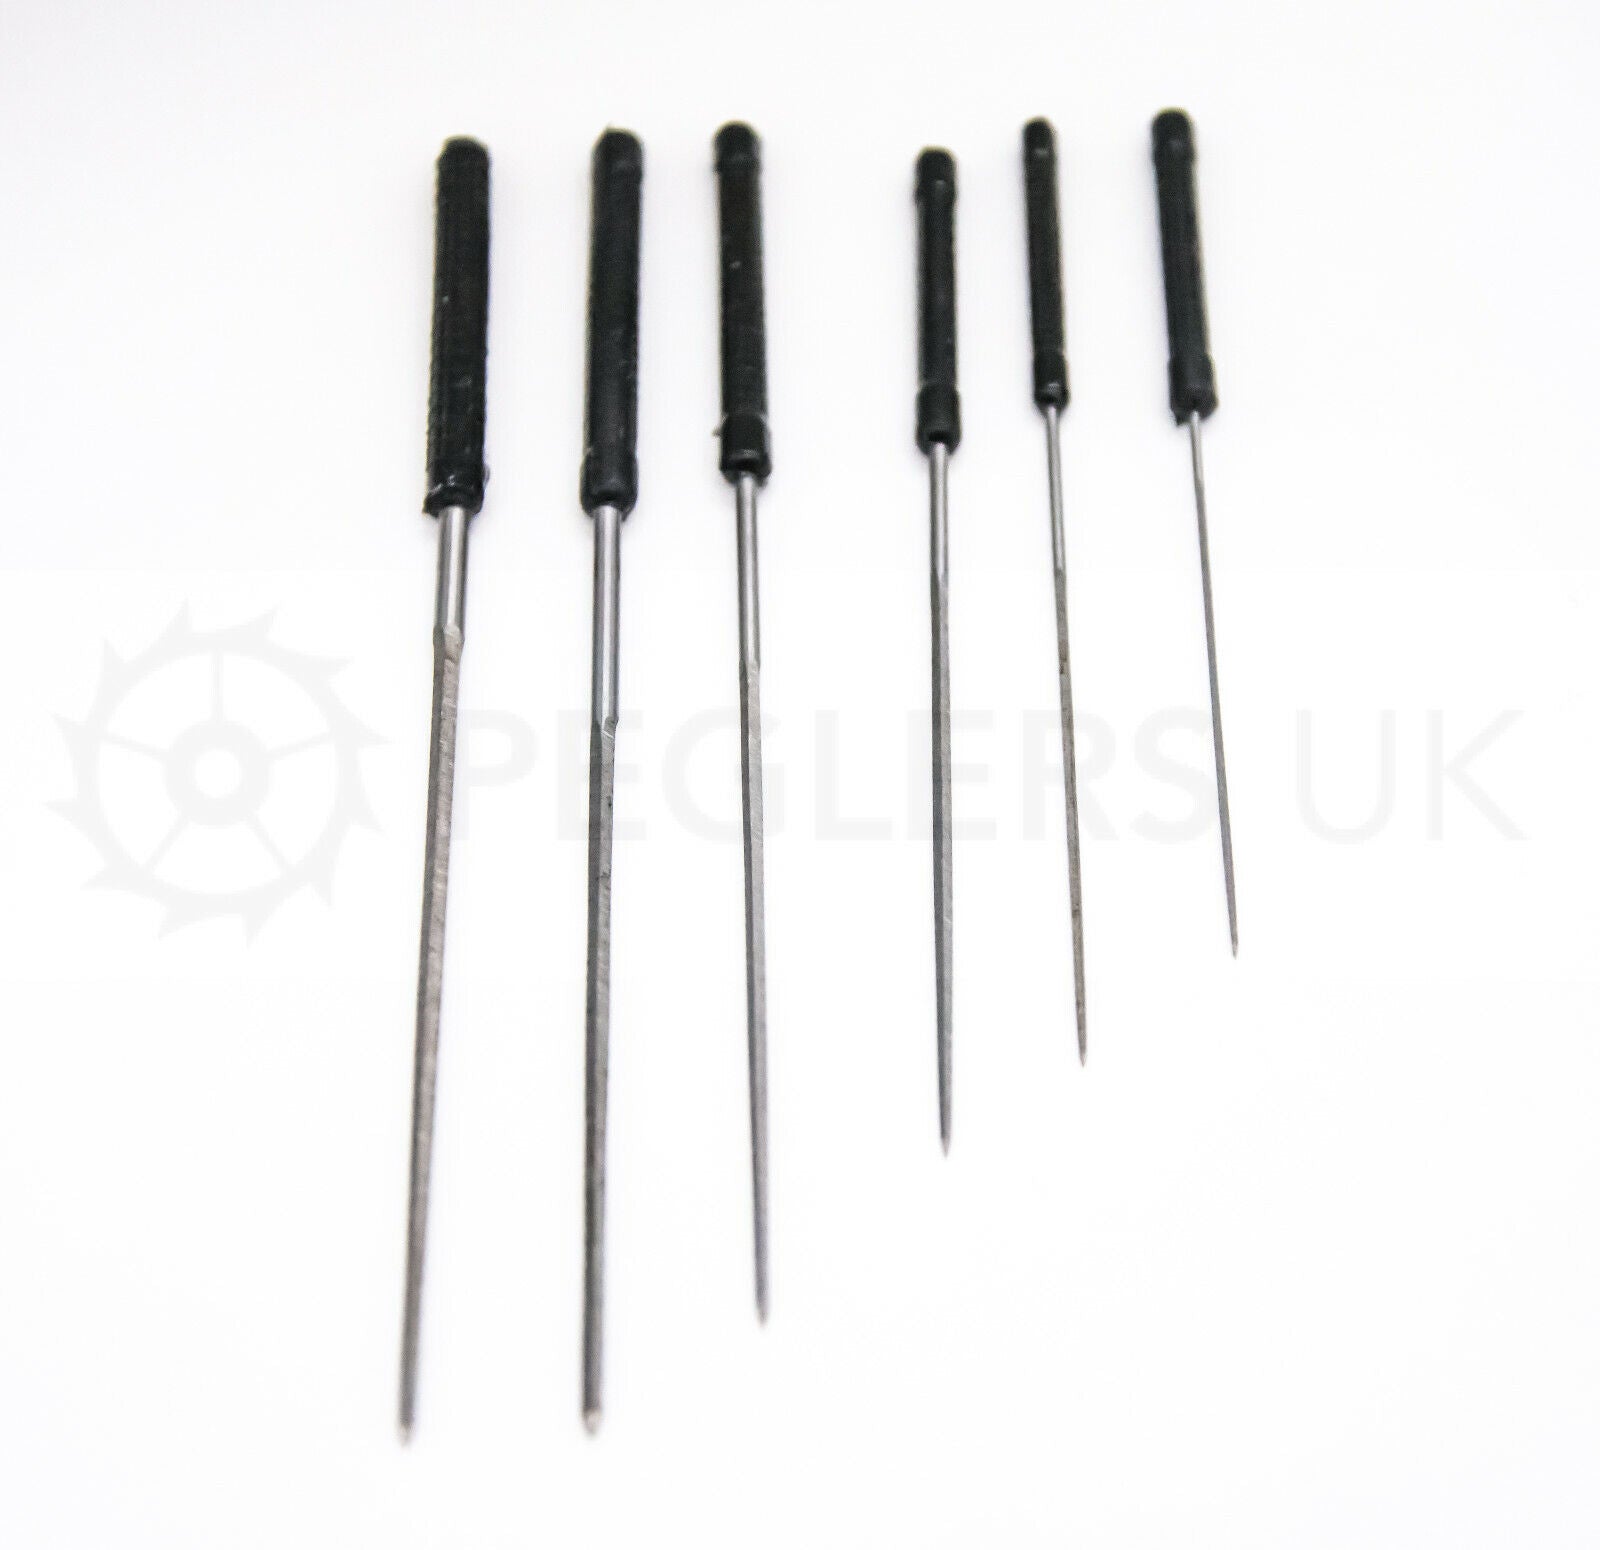 Set of 6 Cutting Broaches with Handle 0.8 - 2.3mm